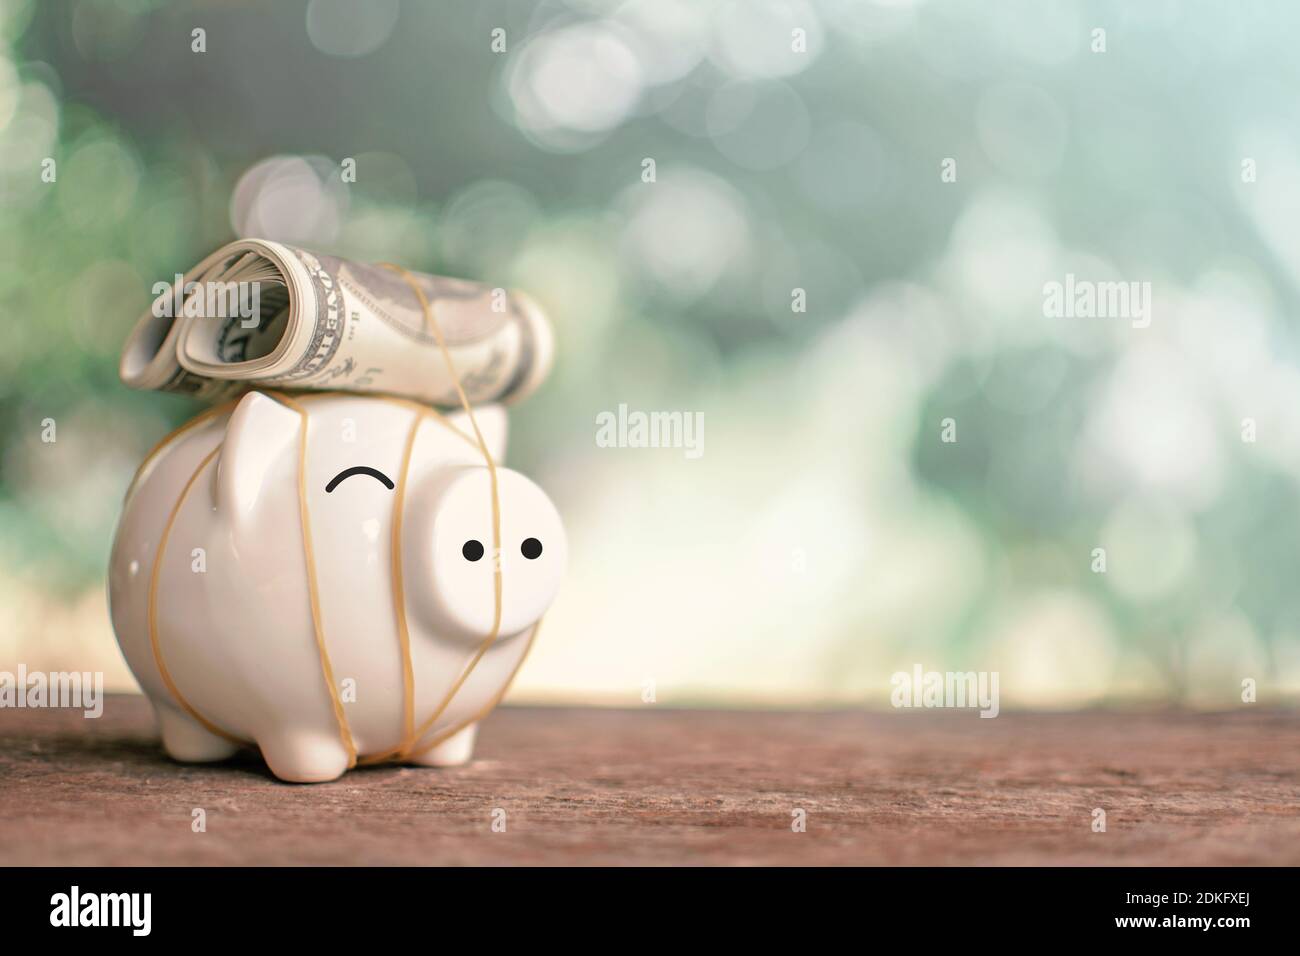 Close-up Of Paper Currency And Piggy Bank On Table Stock Photo